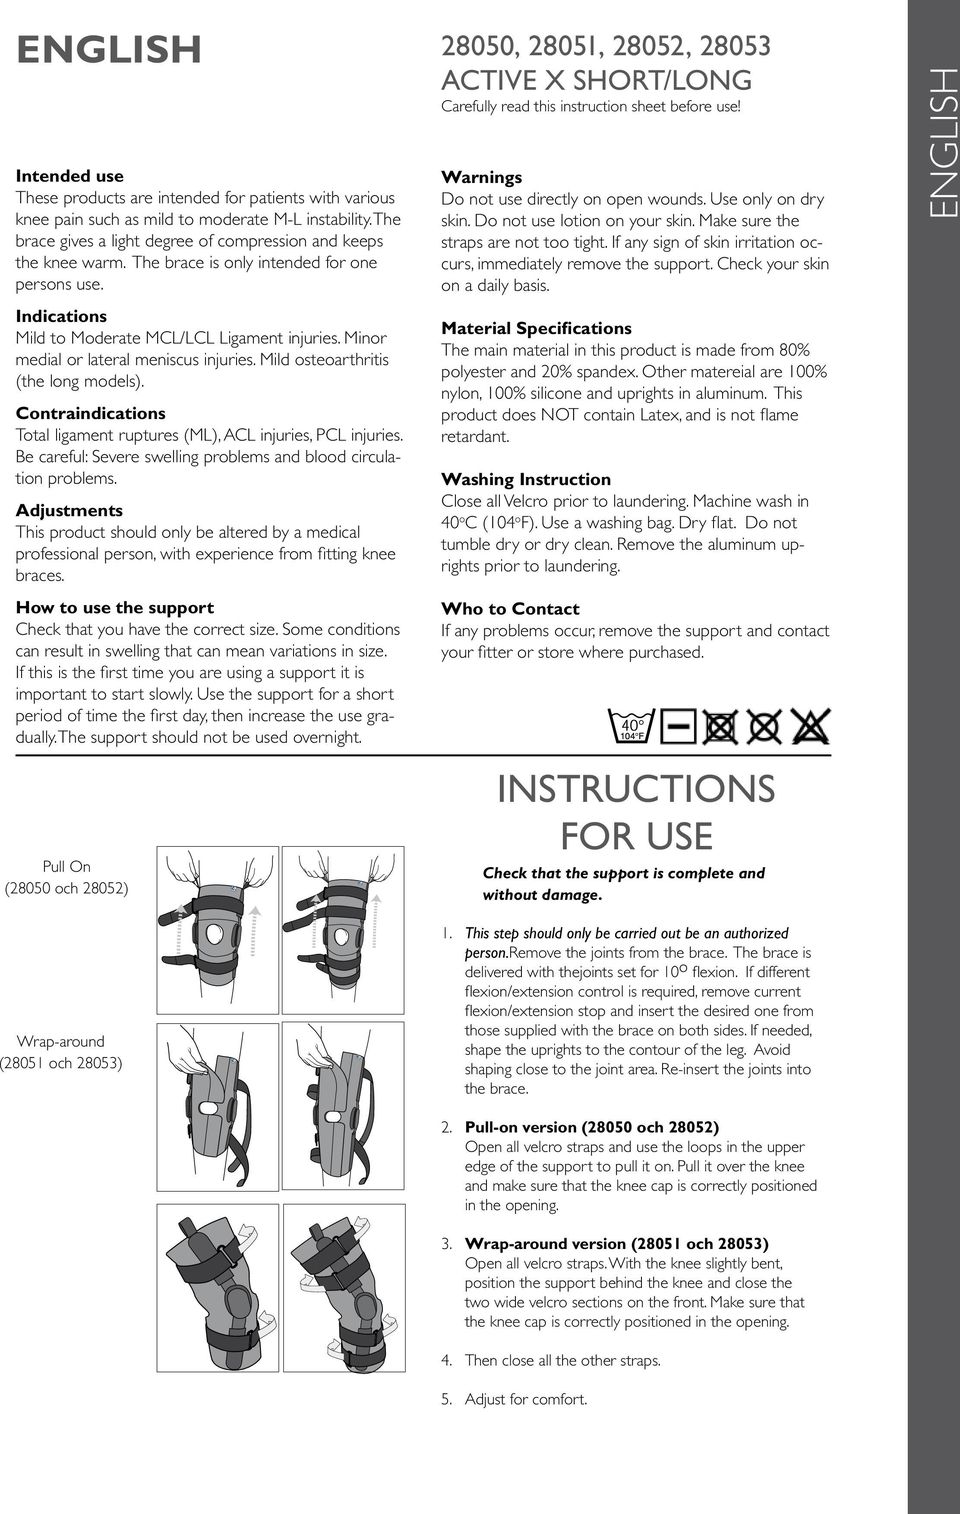 The brace is only intended for one persons use. Indications Mild to Moderate MCL/LCL Ligament injuries. Minor medial or lateral meniscus injuries. Mild osteoarthritis (the long models).